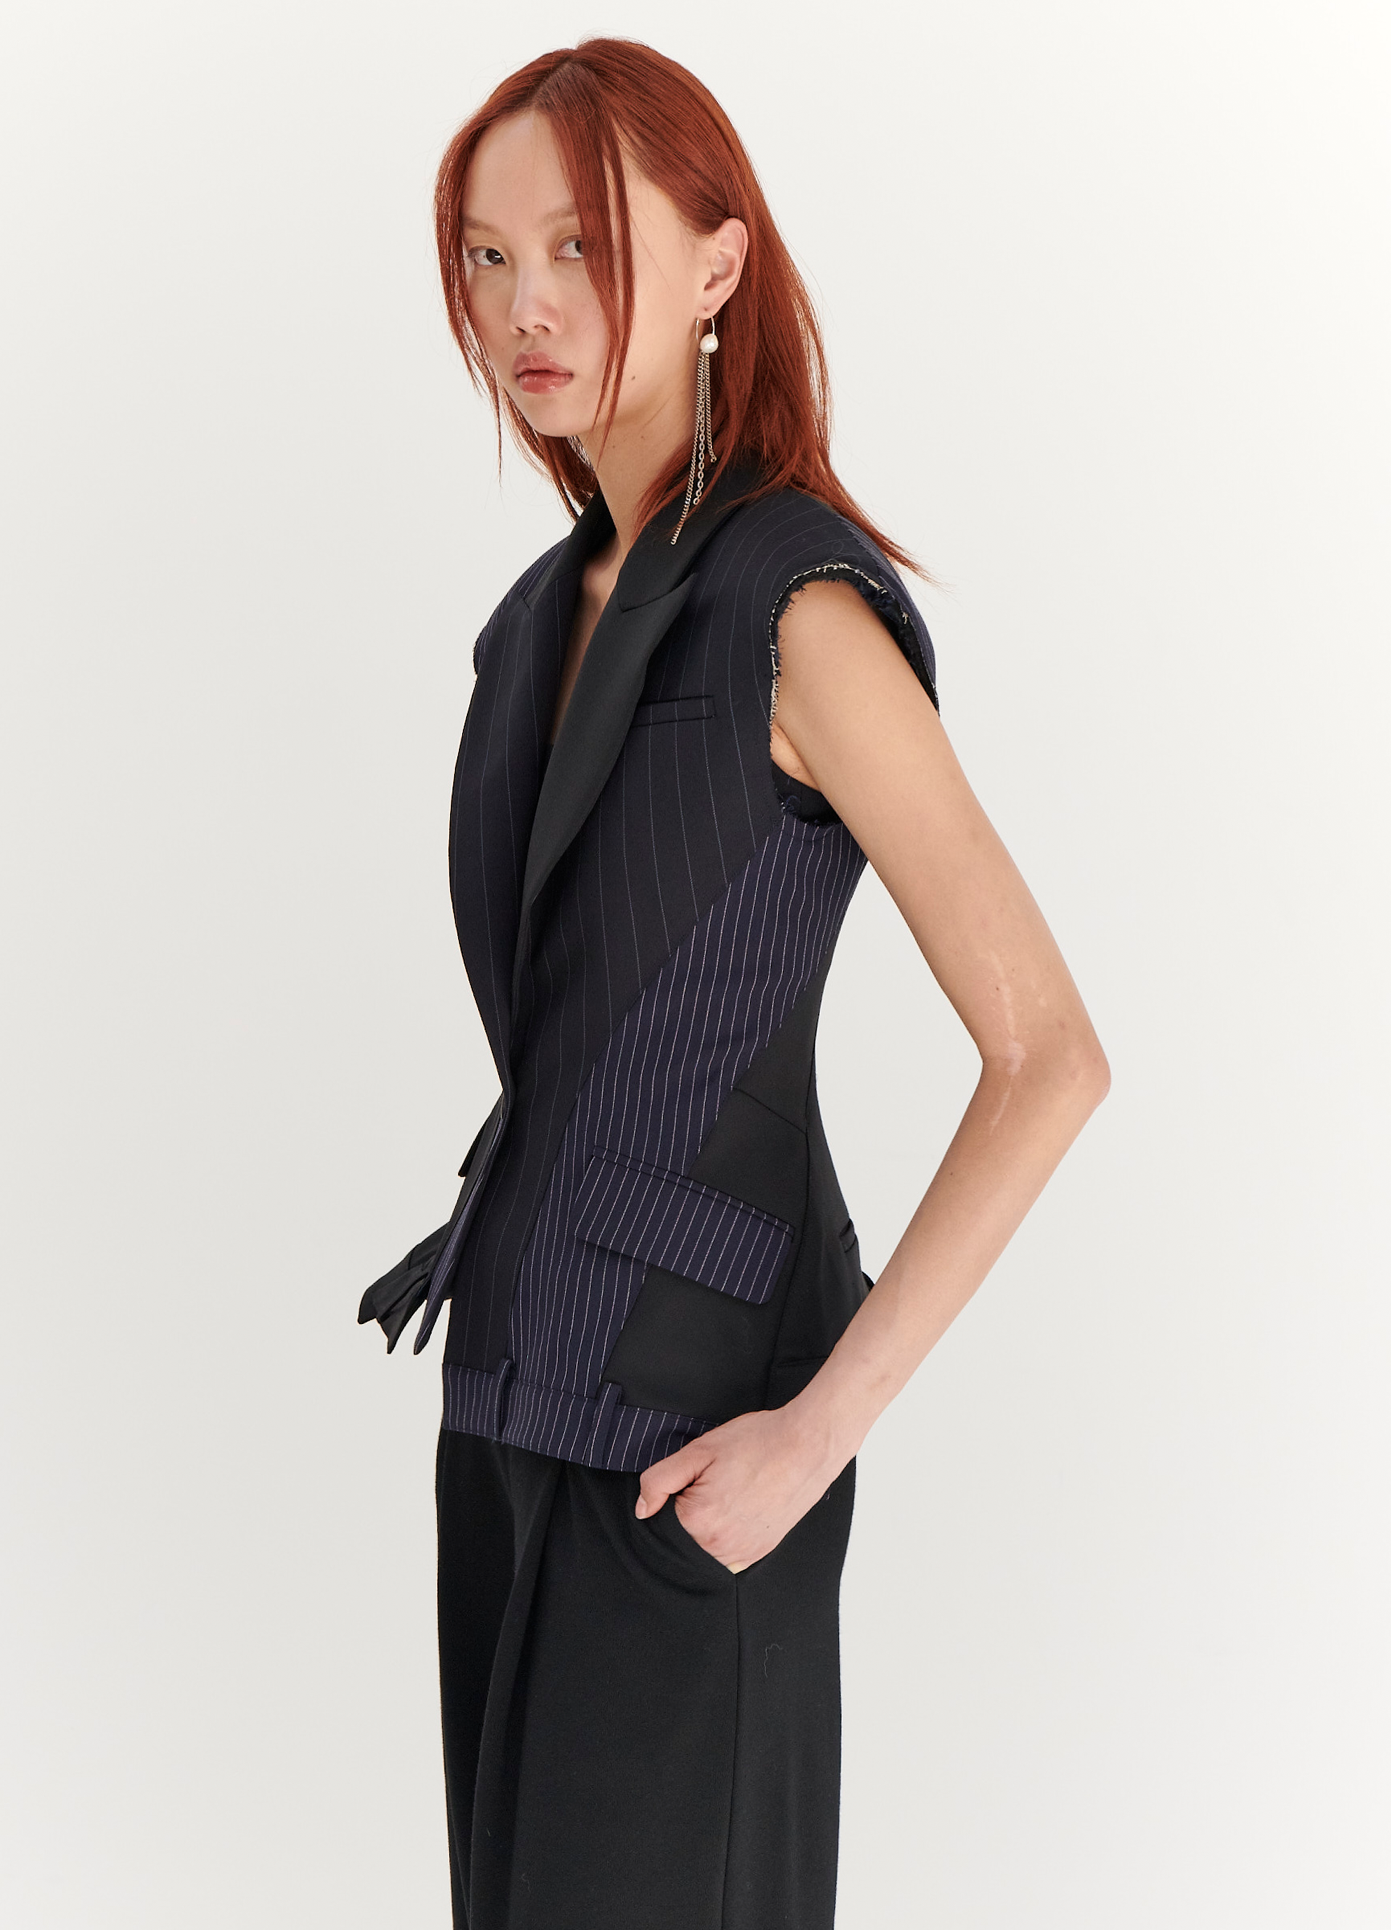 MONSE Deconstructed Sleeveless Jacket in Midnight on model side view